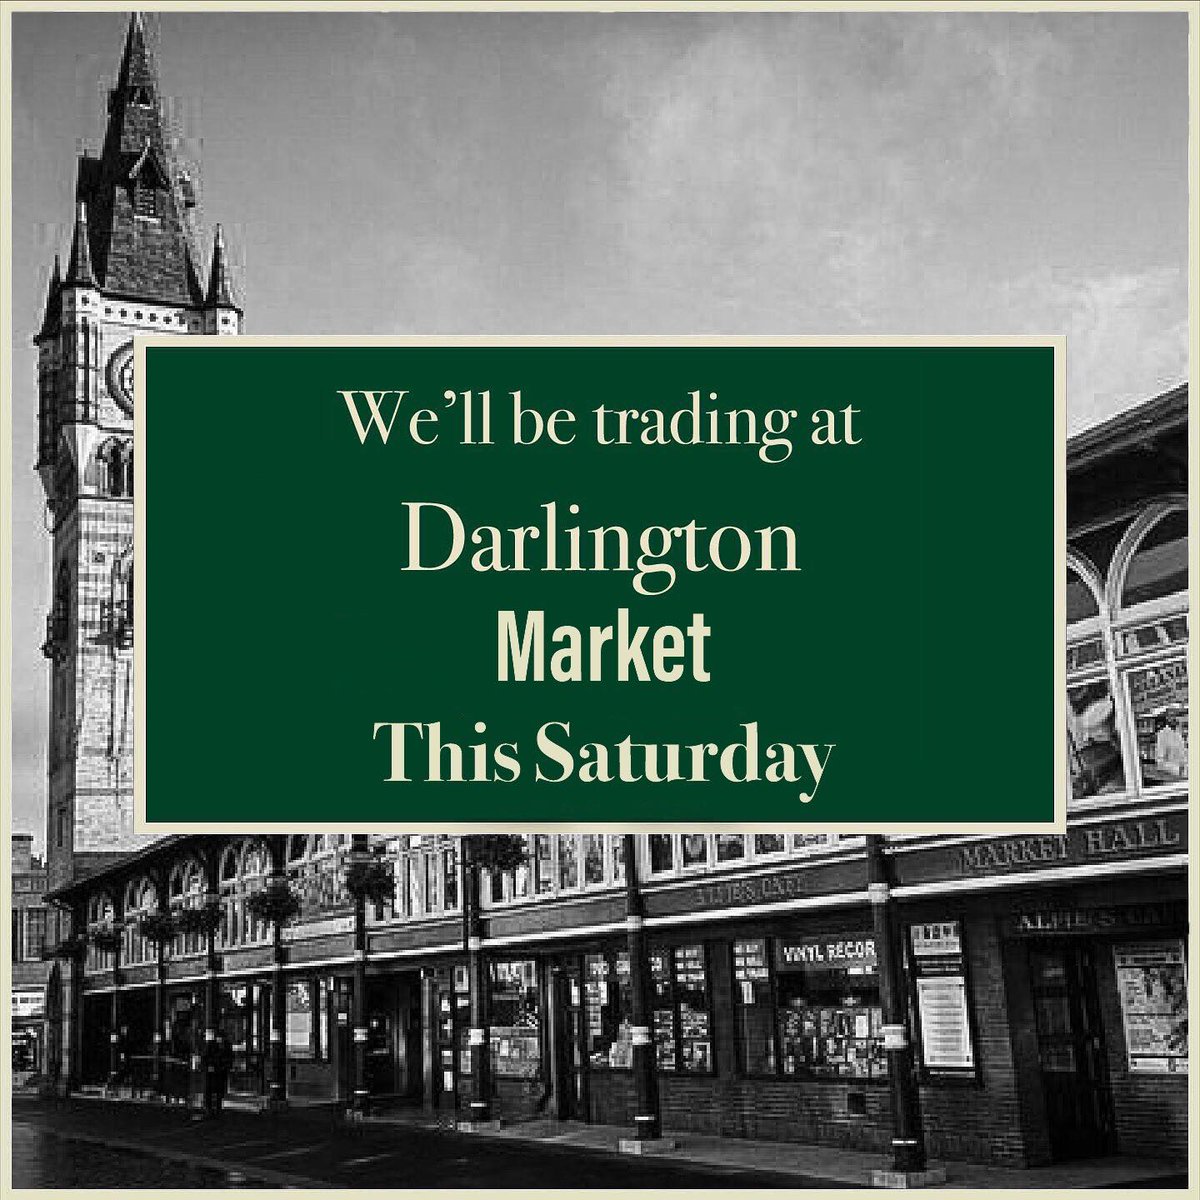 Darlo we are coming for ya! 

Catch us tomorrow at Darlington Outdoor Market for all your vintage subculture favourites from Fred Perry, Ben Sherman, Dr Martens etc.

@marketsmatter #Darlington #Darlingtonmarket #Northeastmarkets #northeast #vintageclothing #nefollowers #darlo